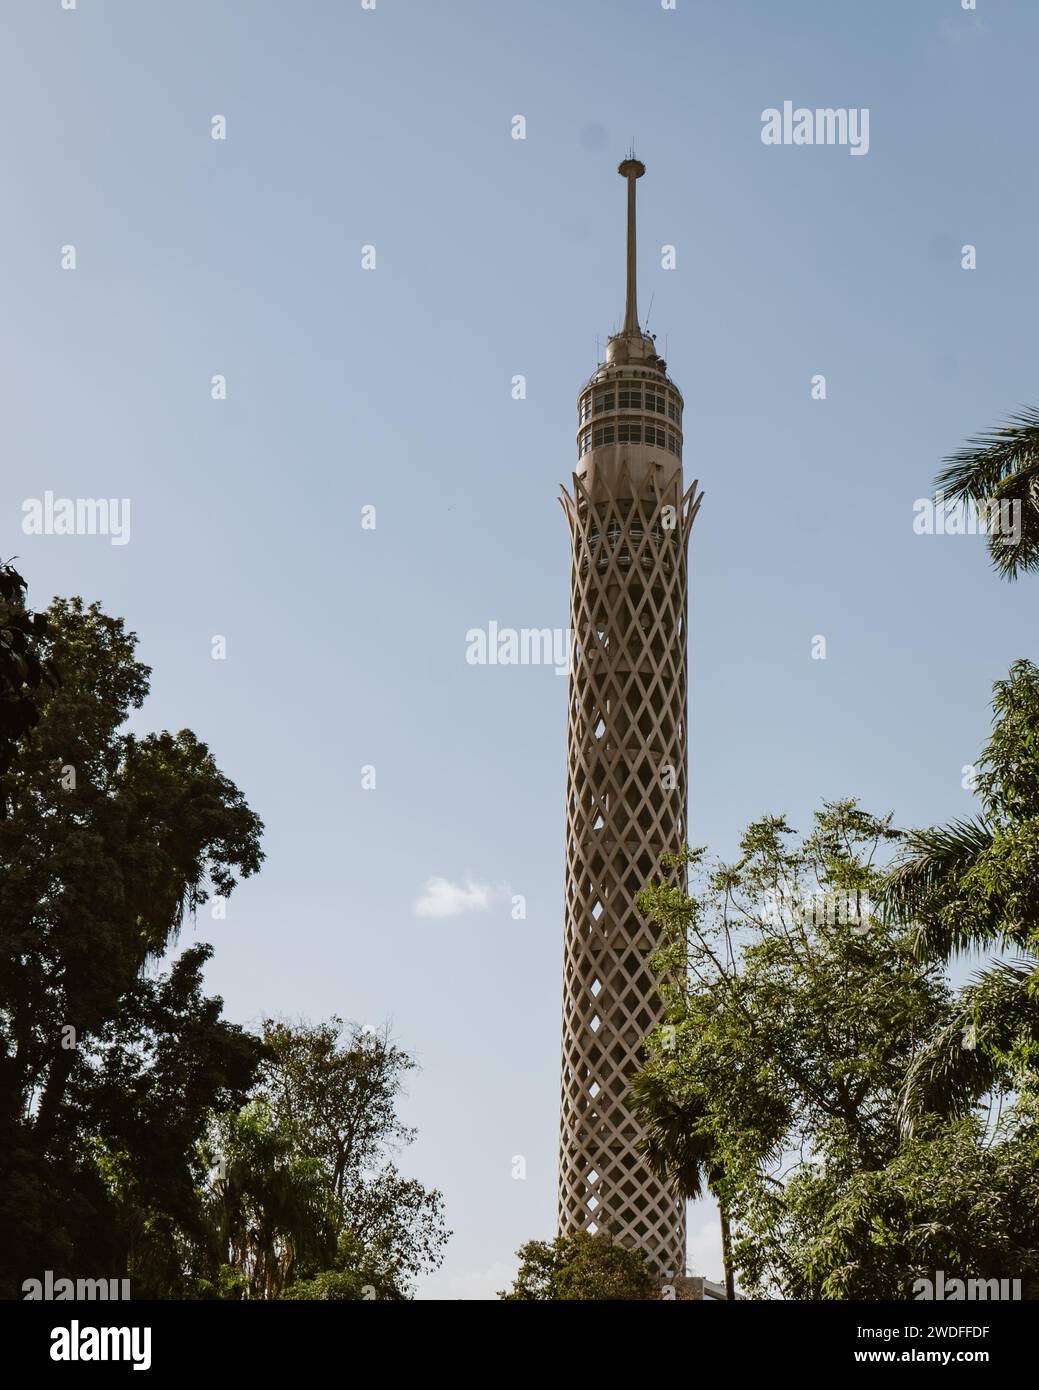 Cairo Tower, a famous landmark with open lattice-work design to evoke a pharaonic lotus plant, an iconic symbol of Ancient Egypt. Stock Photo